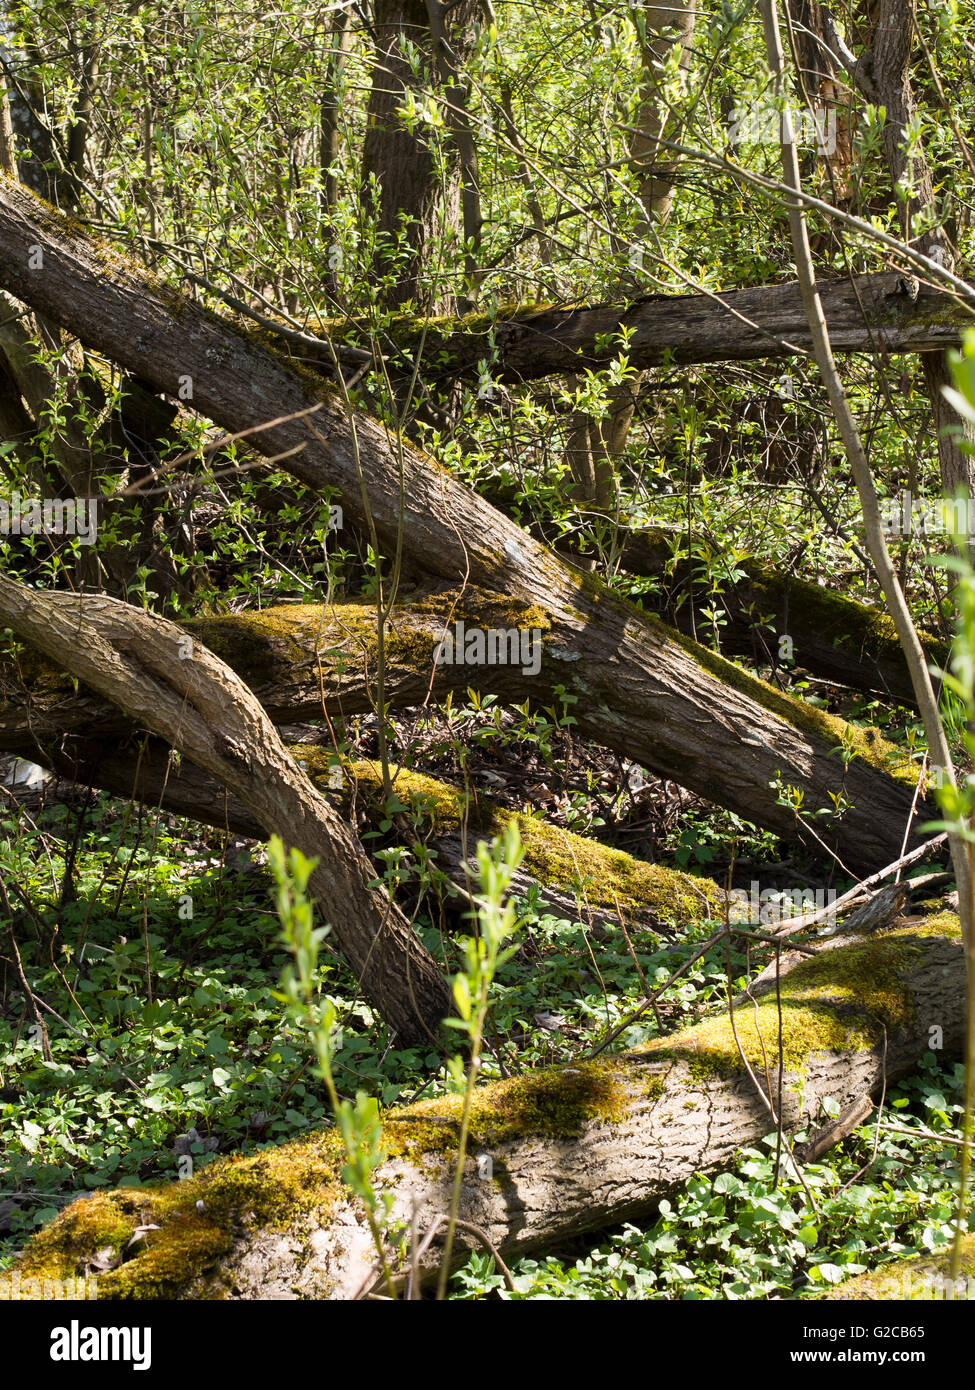 Springtime in a Norwegian wood, dense undergrowth turning green and trees with moss left to decay in a natural way, Oslo Norway Stock Photo